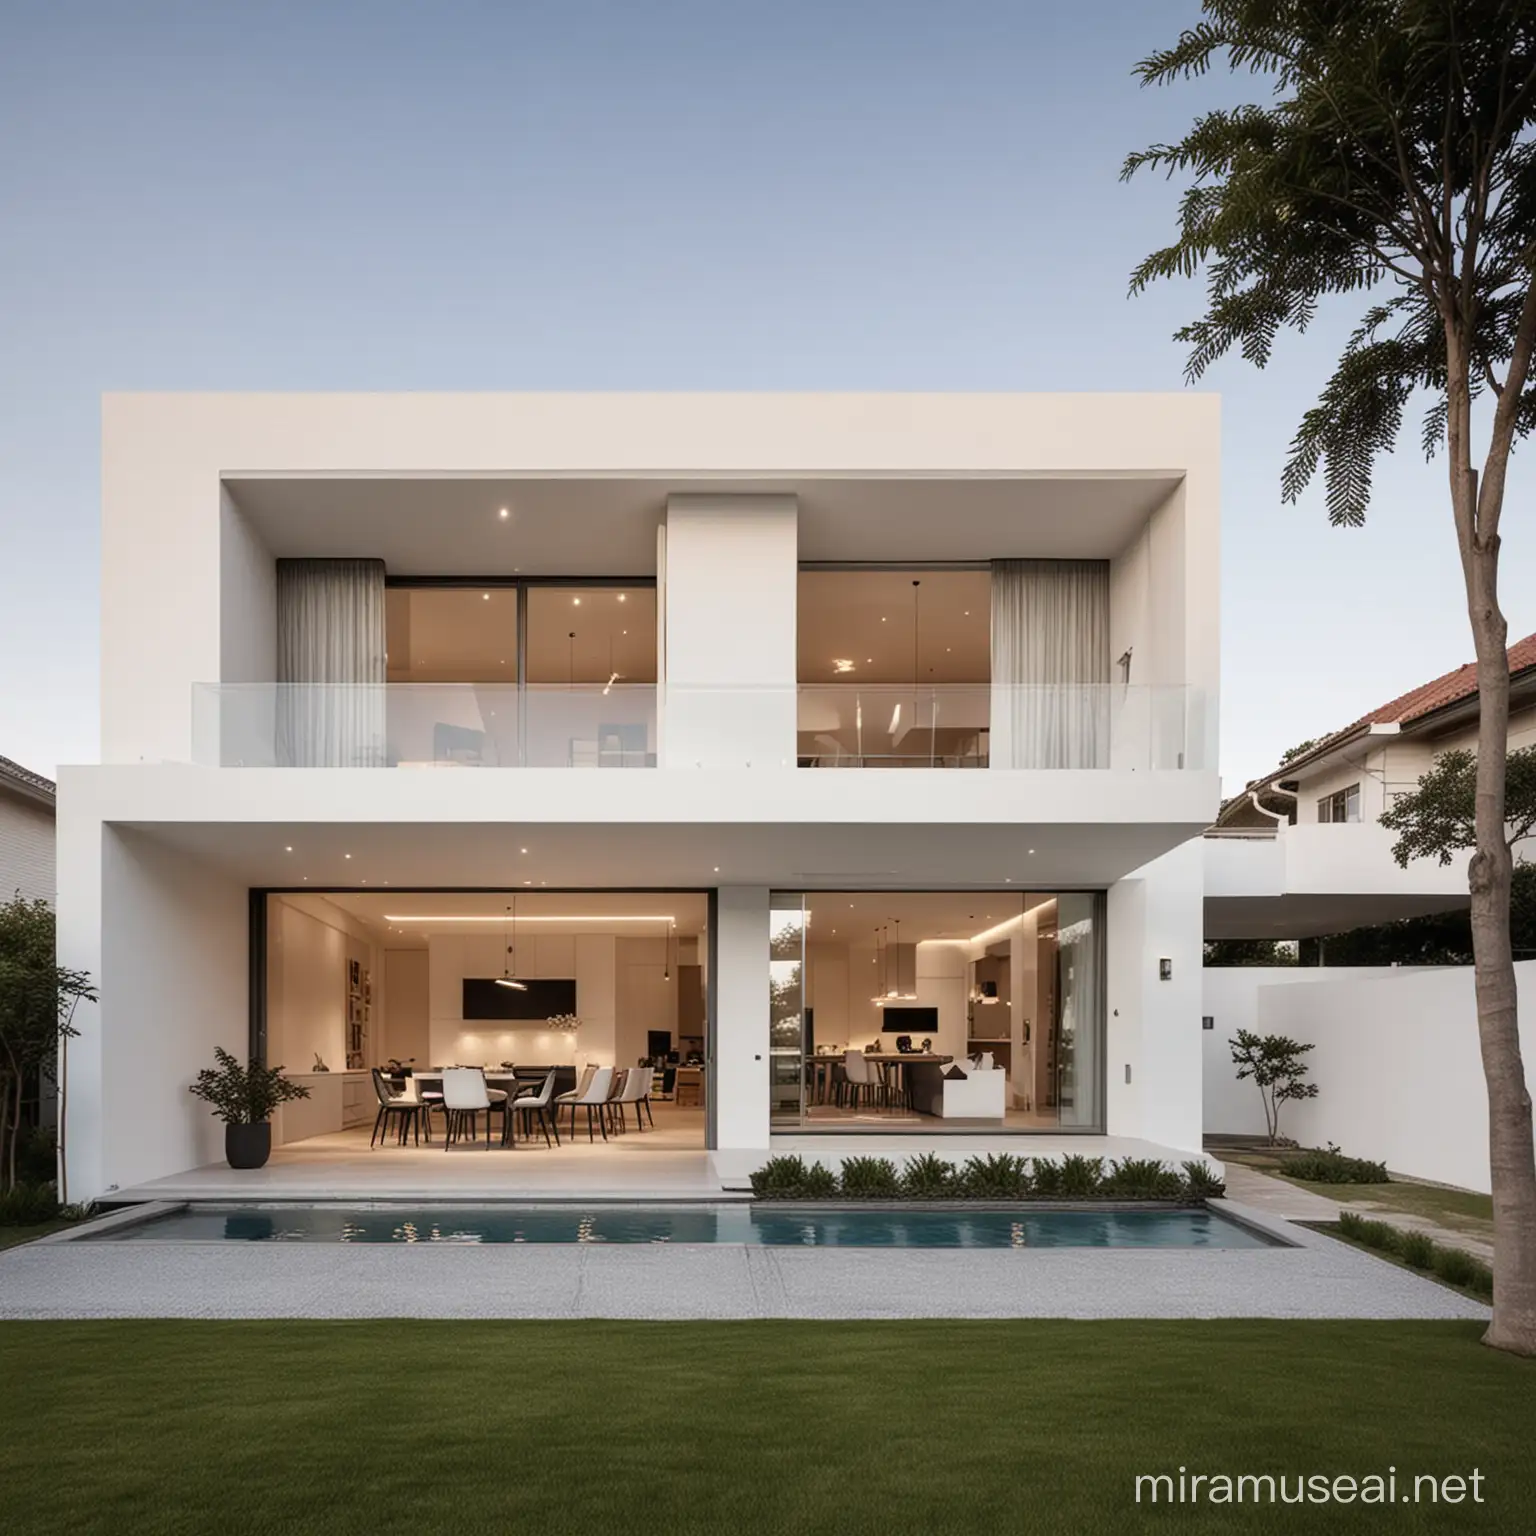 minimalism  beautiful HOUSE atmosphore with house and family living there EXTERIOR DESIGN
